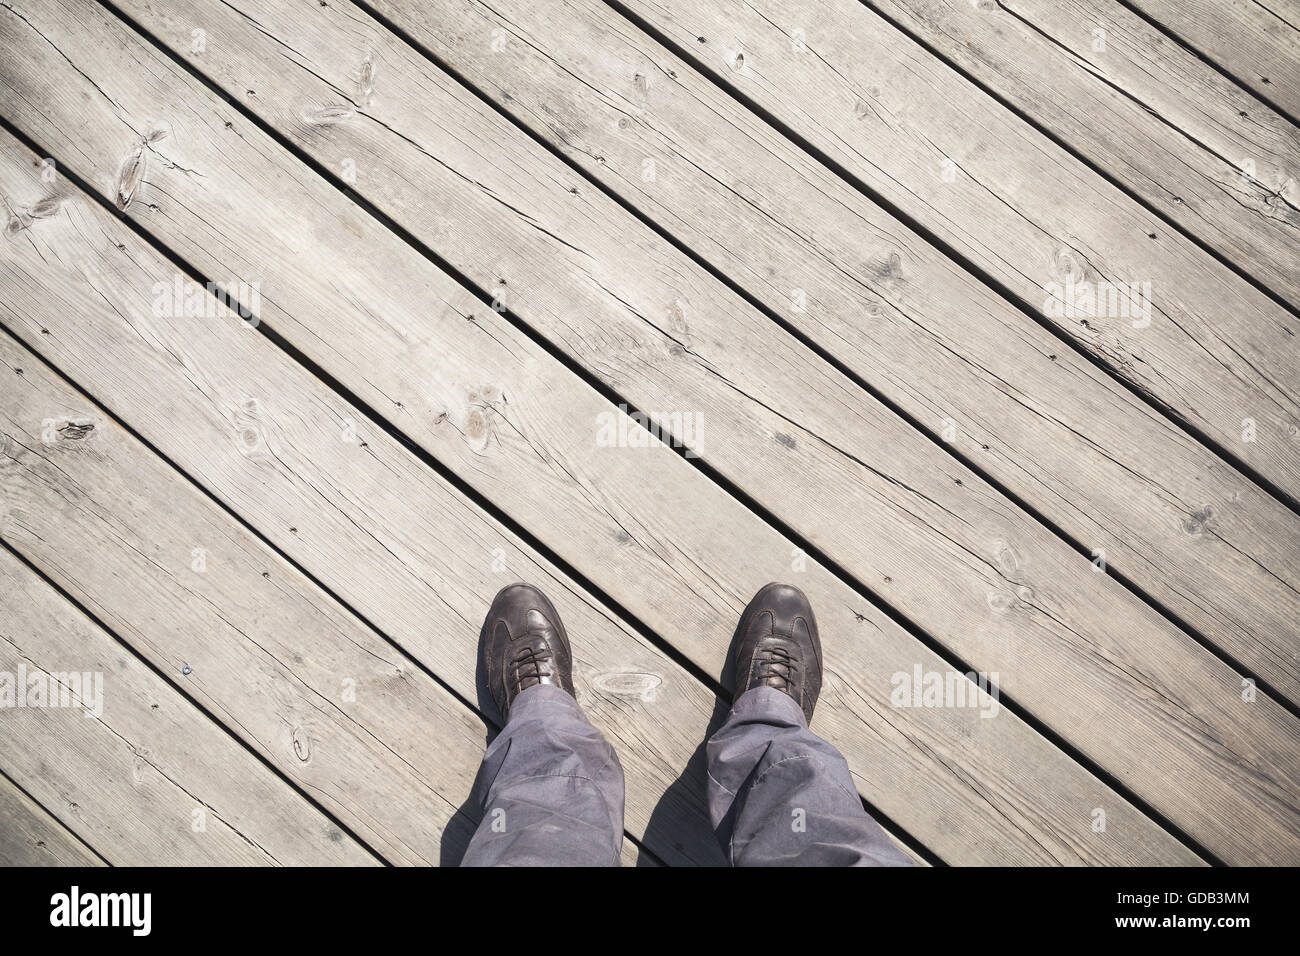 Male feet in leather shoes stand on old wooden pier floor, first person view Stock Photo